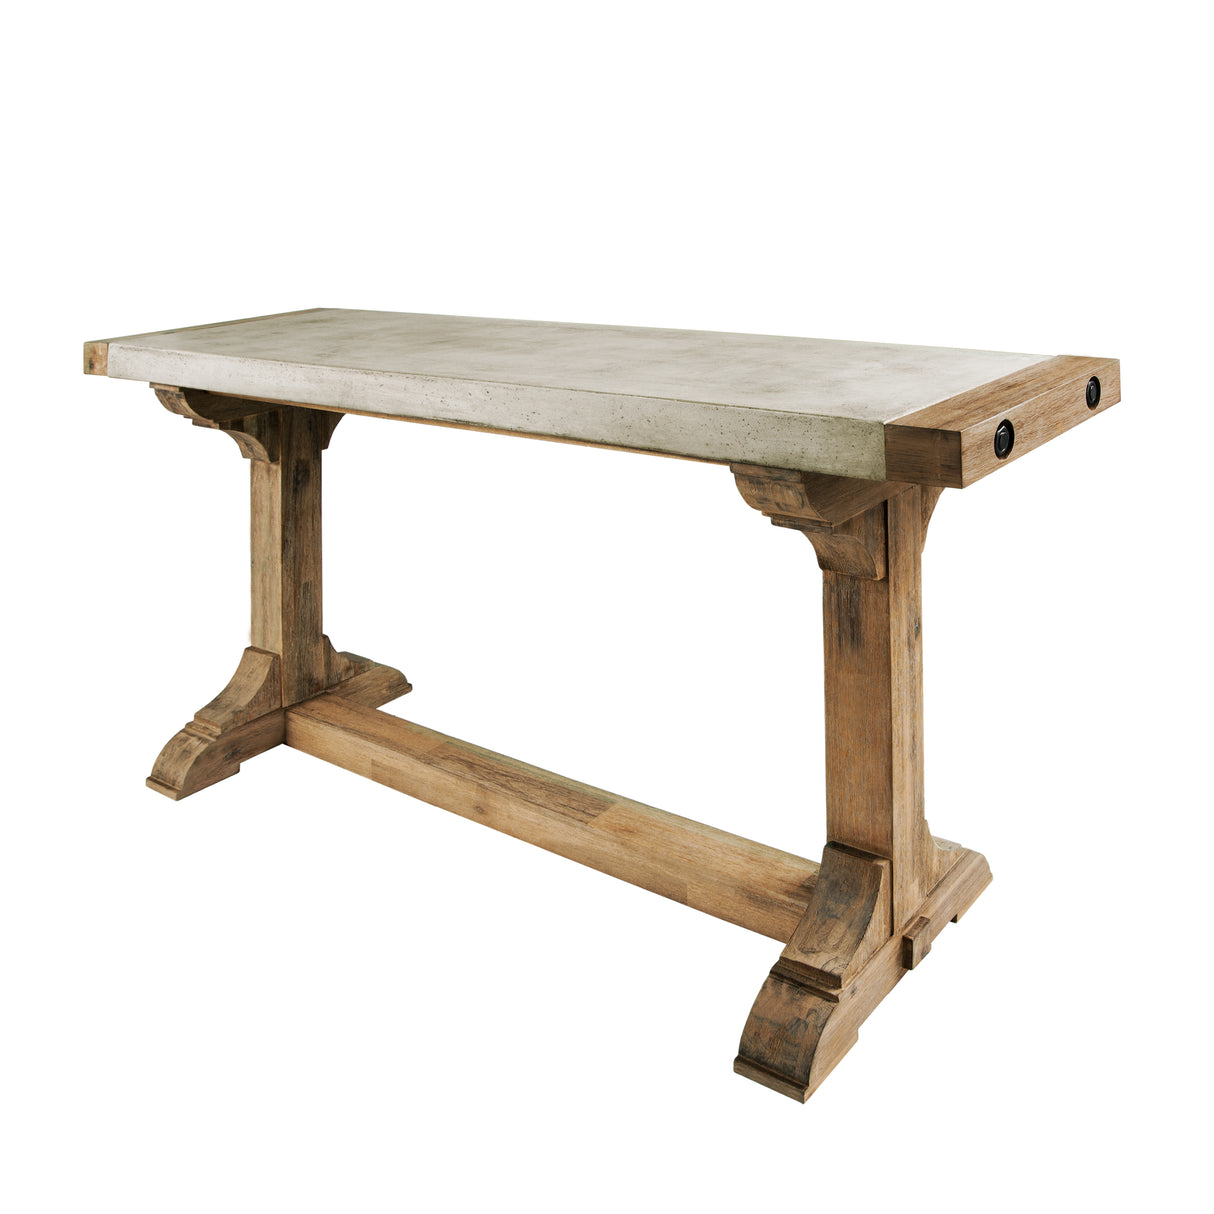 Elk 157-020 Pirate Console Table